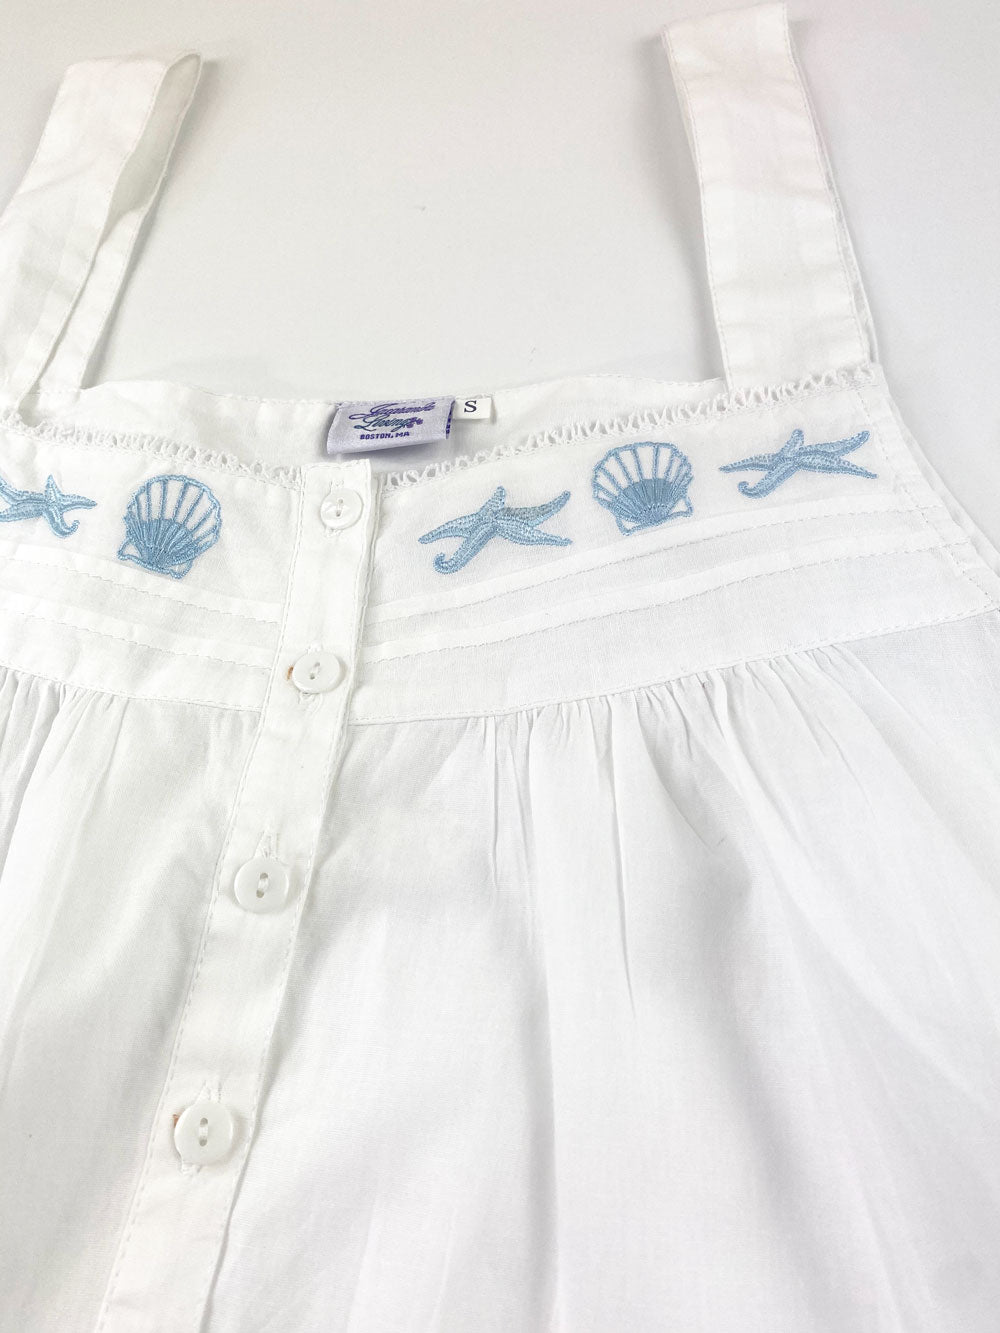 Seaside White Cotton Dress, Embroidered